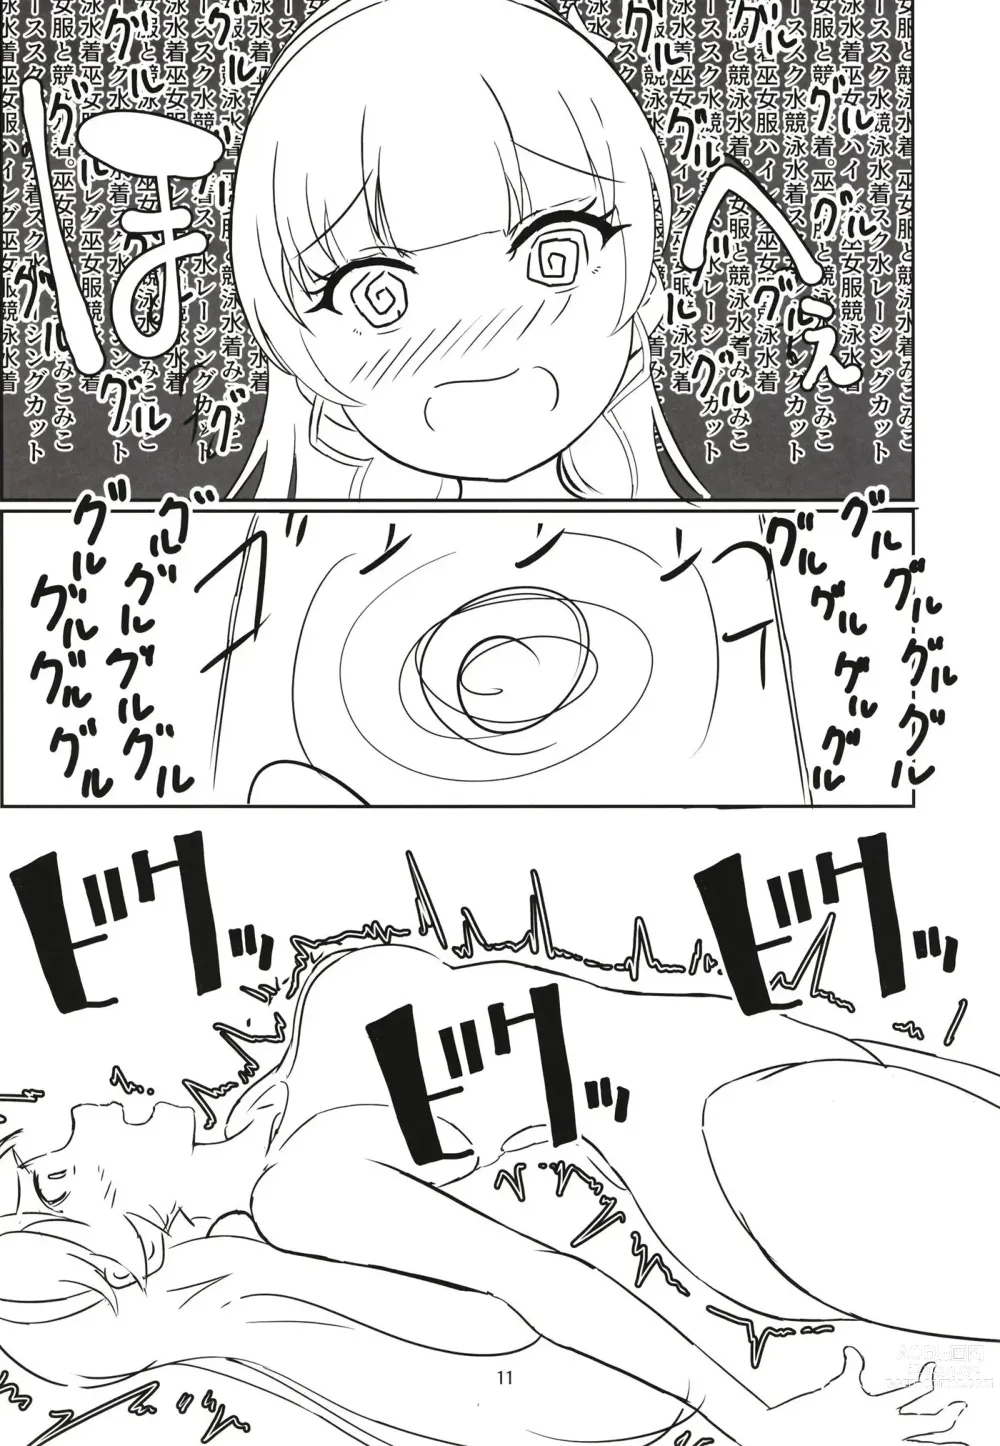 Page 10 of doujinshi Laundry Labyrinth